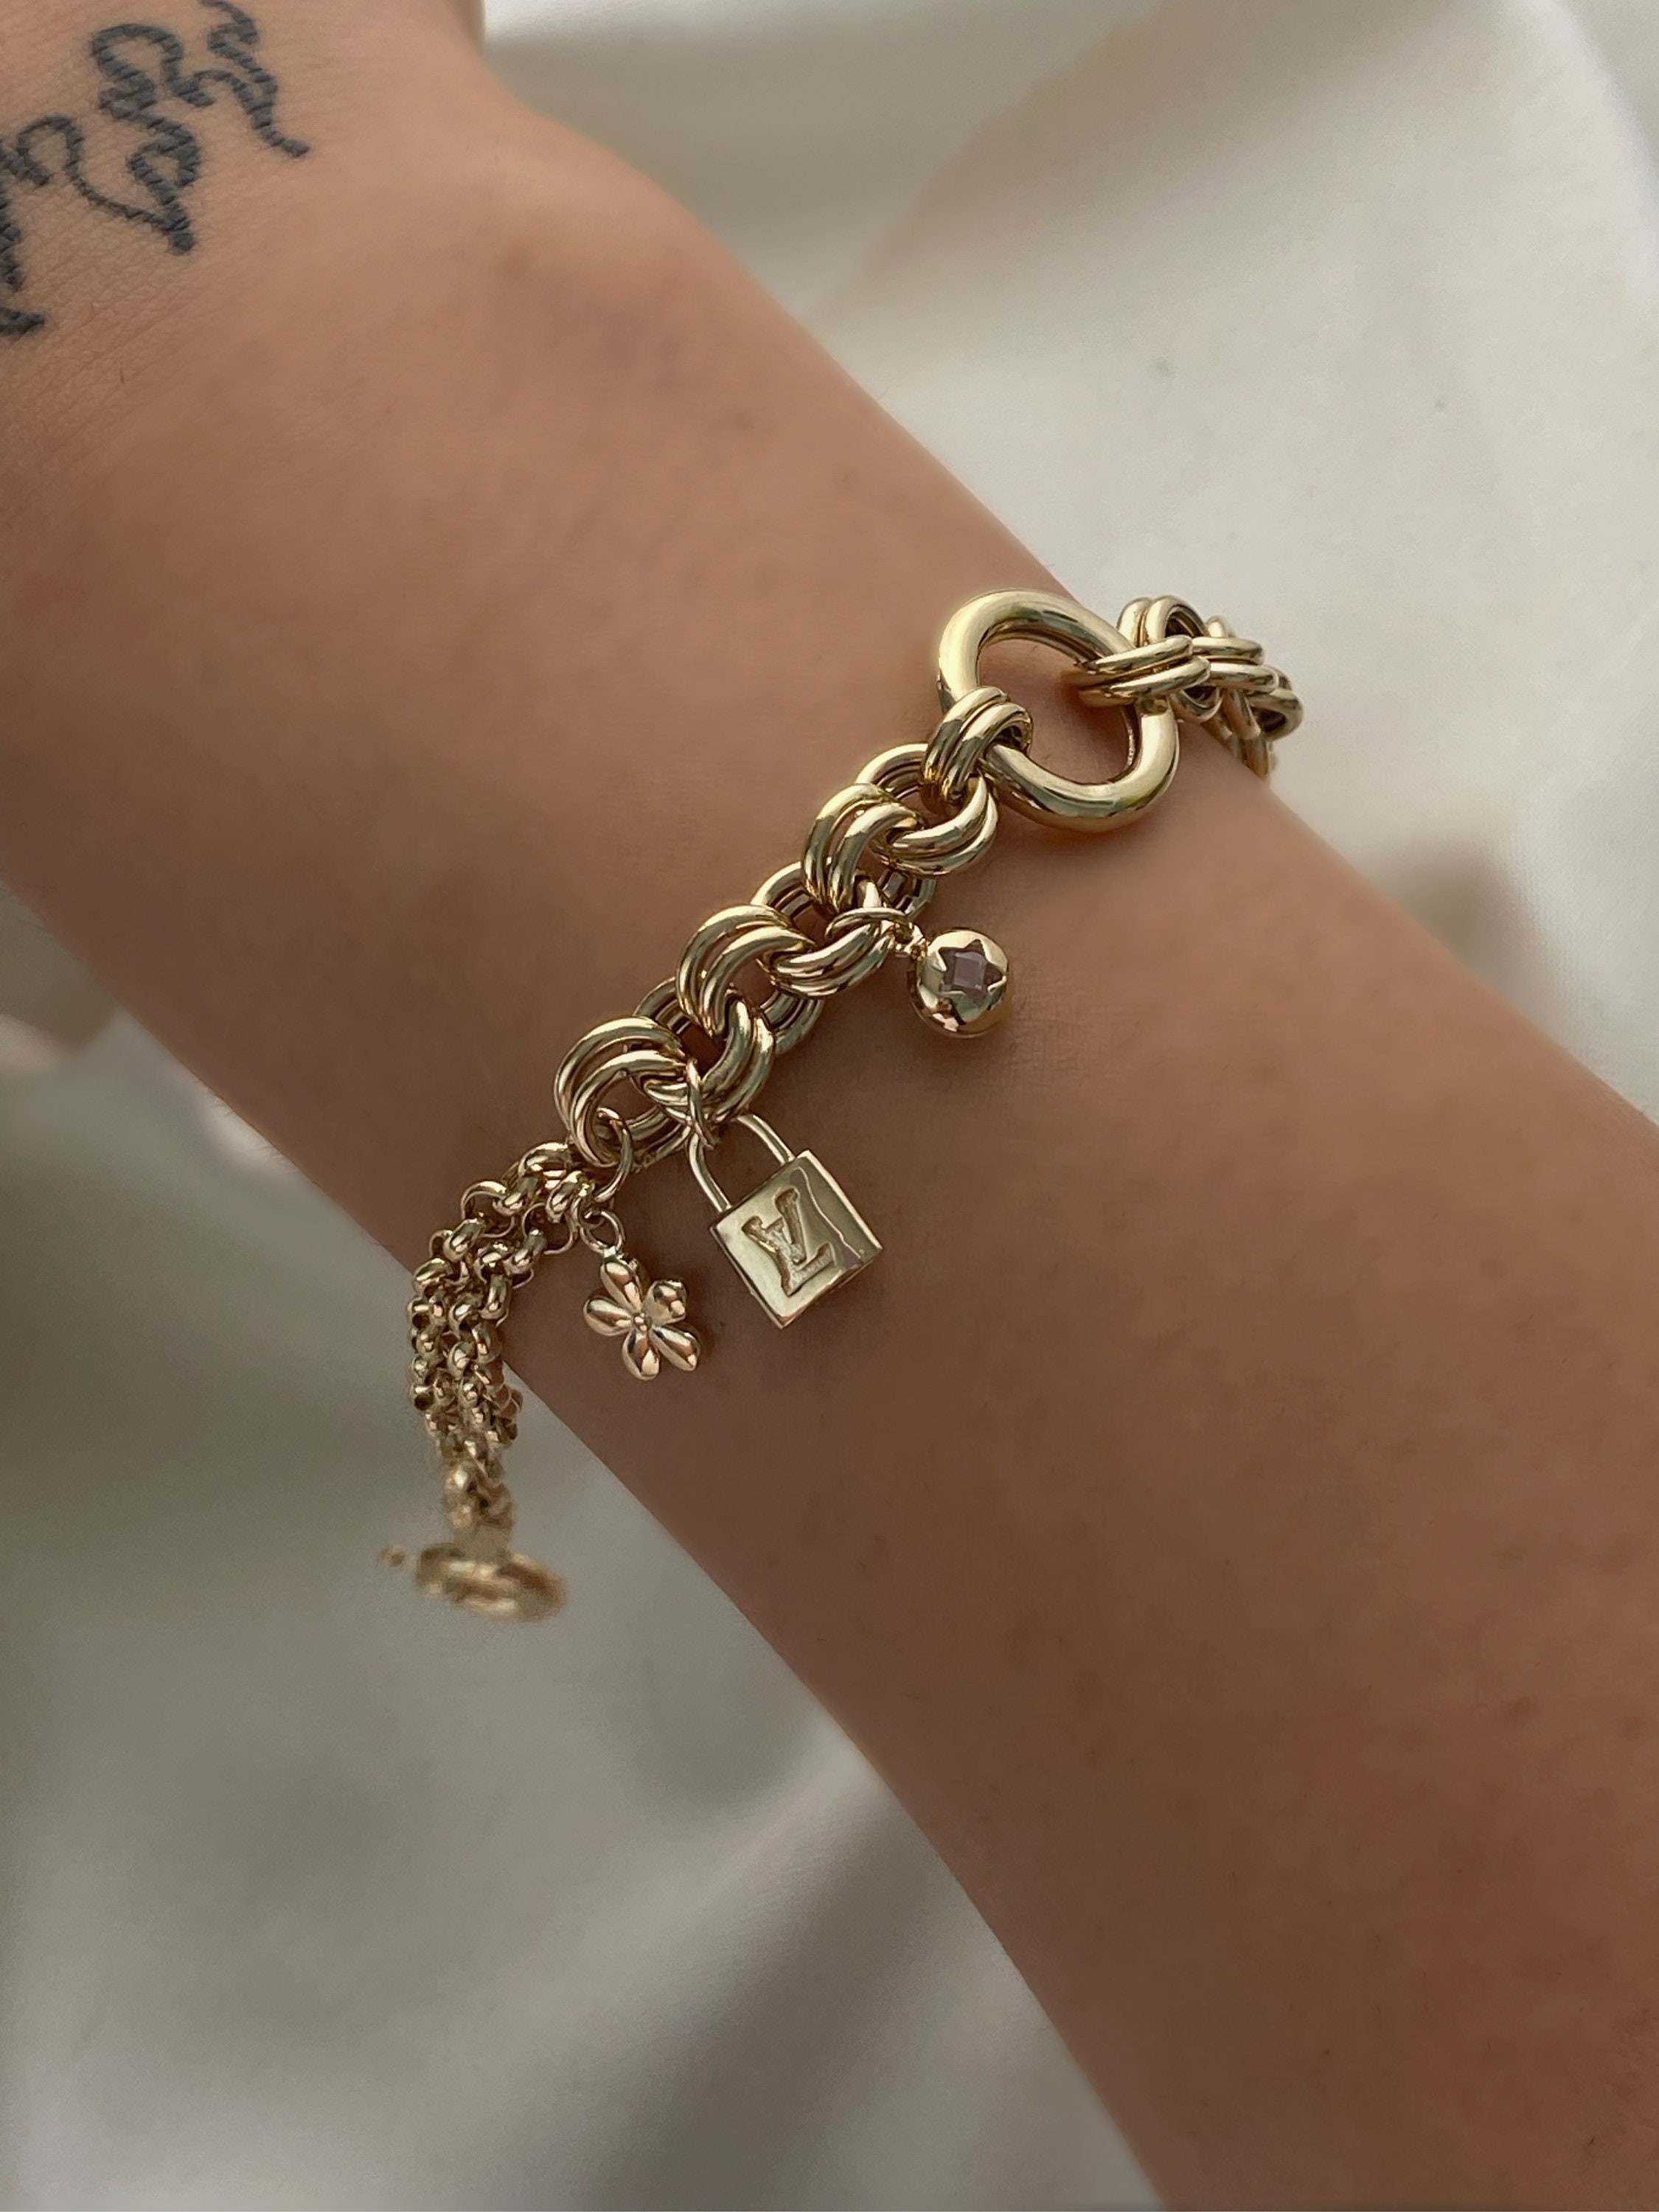 14k 7 Yellow Gold Charm Bracelet with Spring Ring Clasp ADJUSTABLE sizing  for any size up to 8